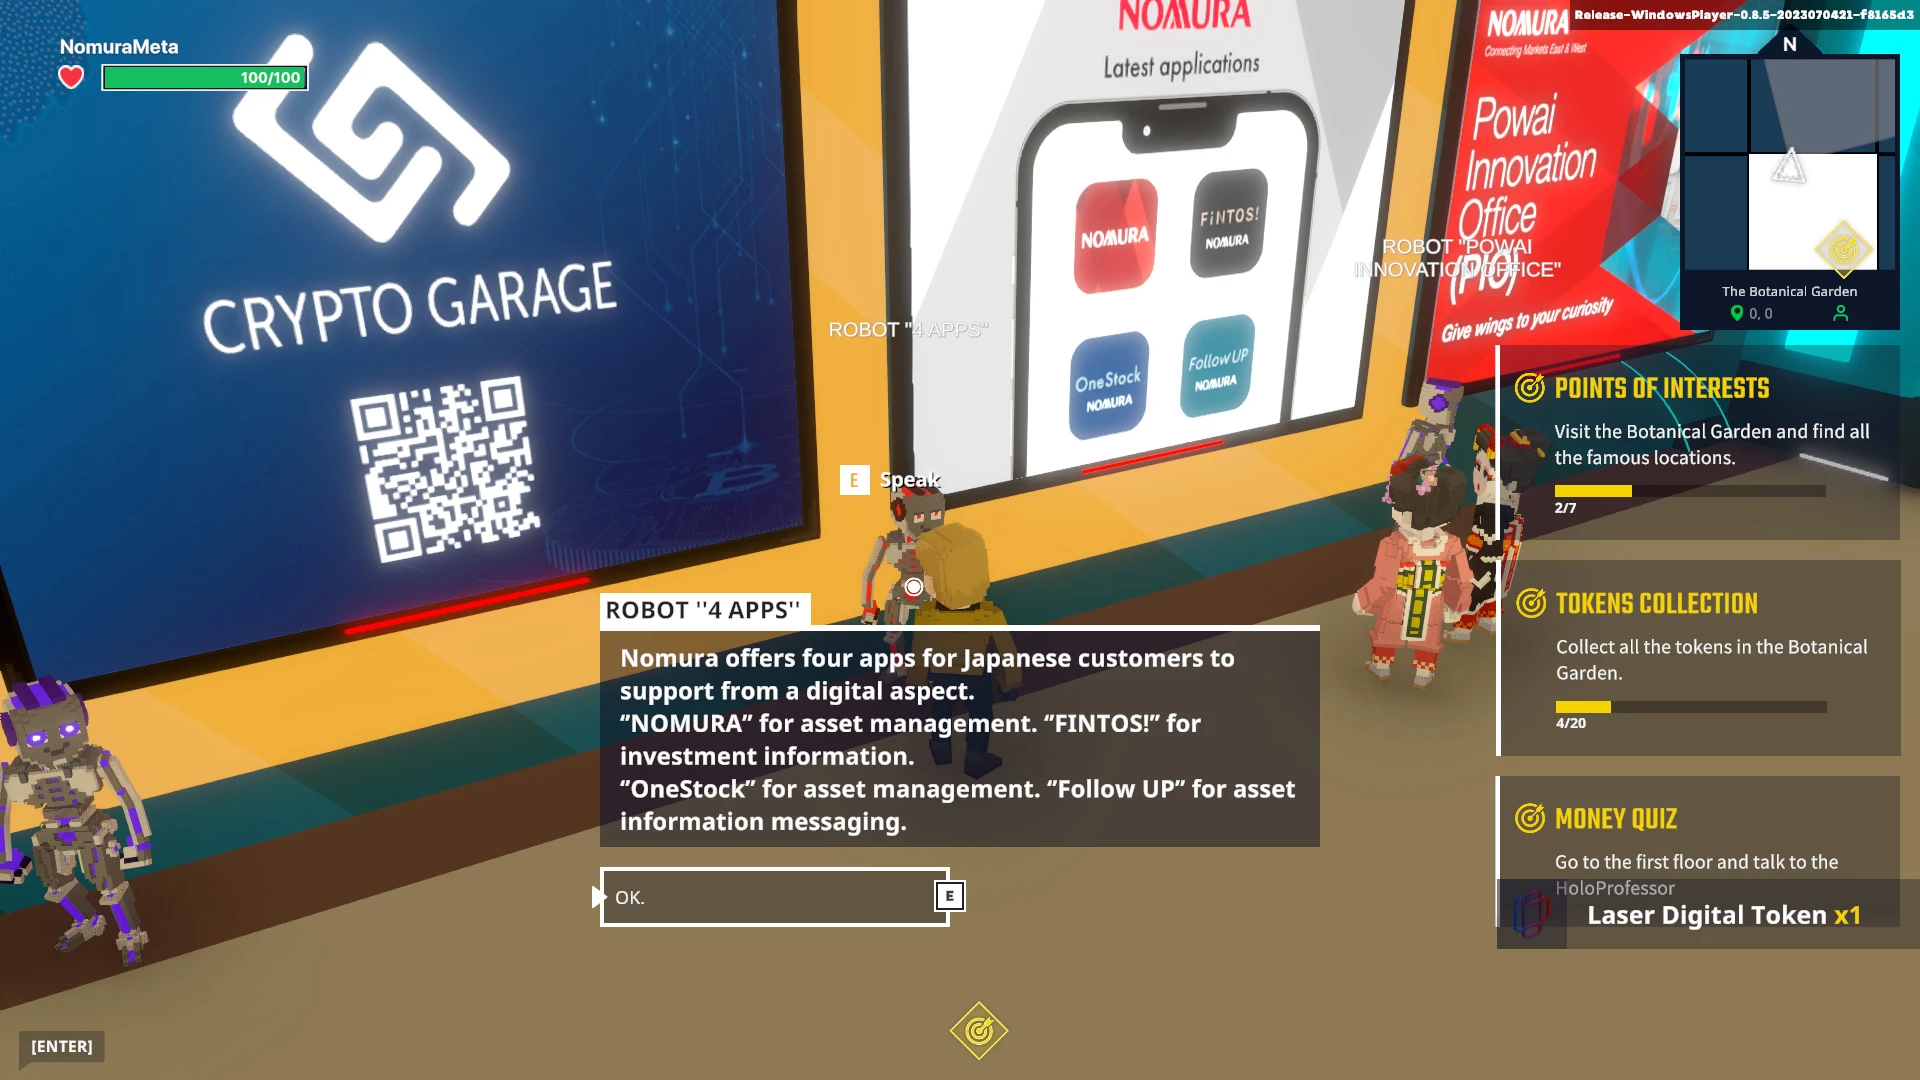 QR Codes allows visitors to learn more about Nomura and Laser Digital